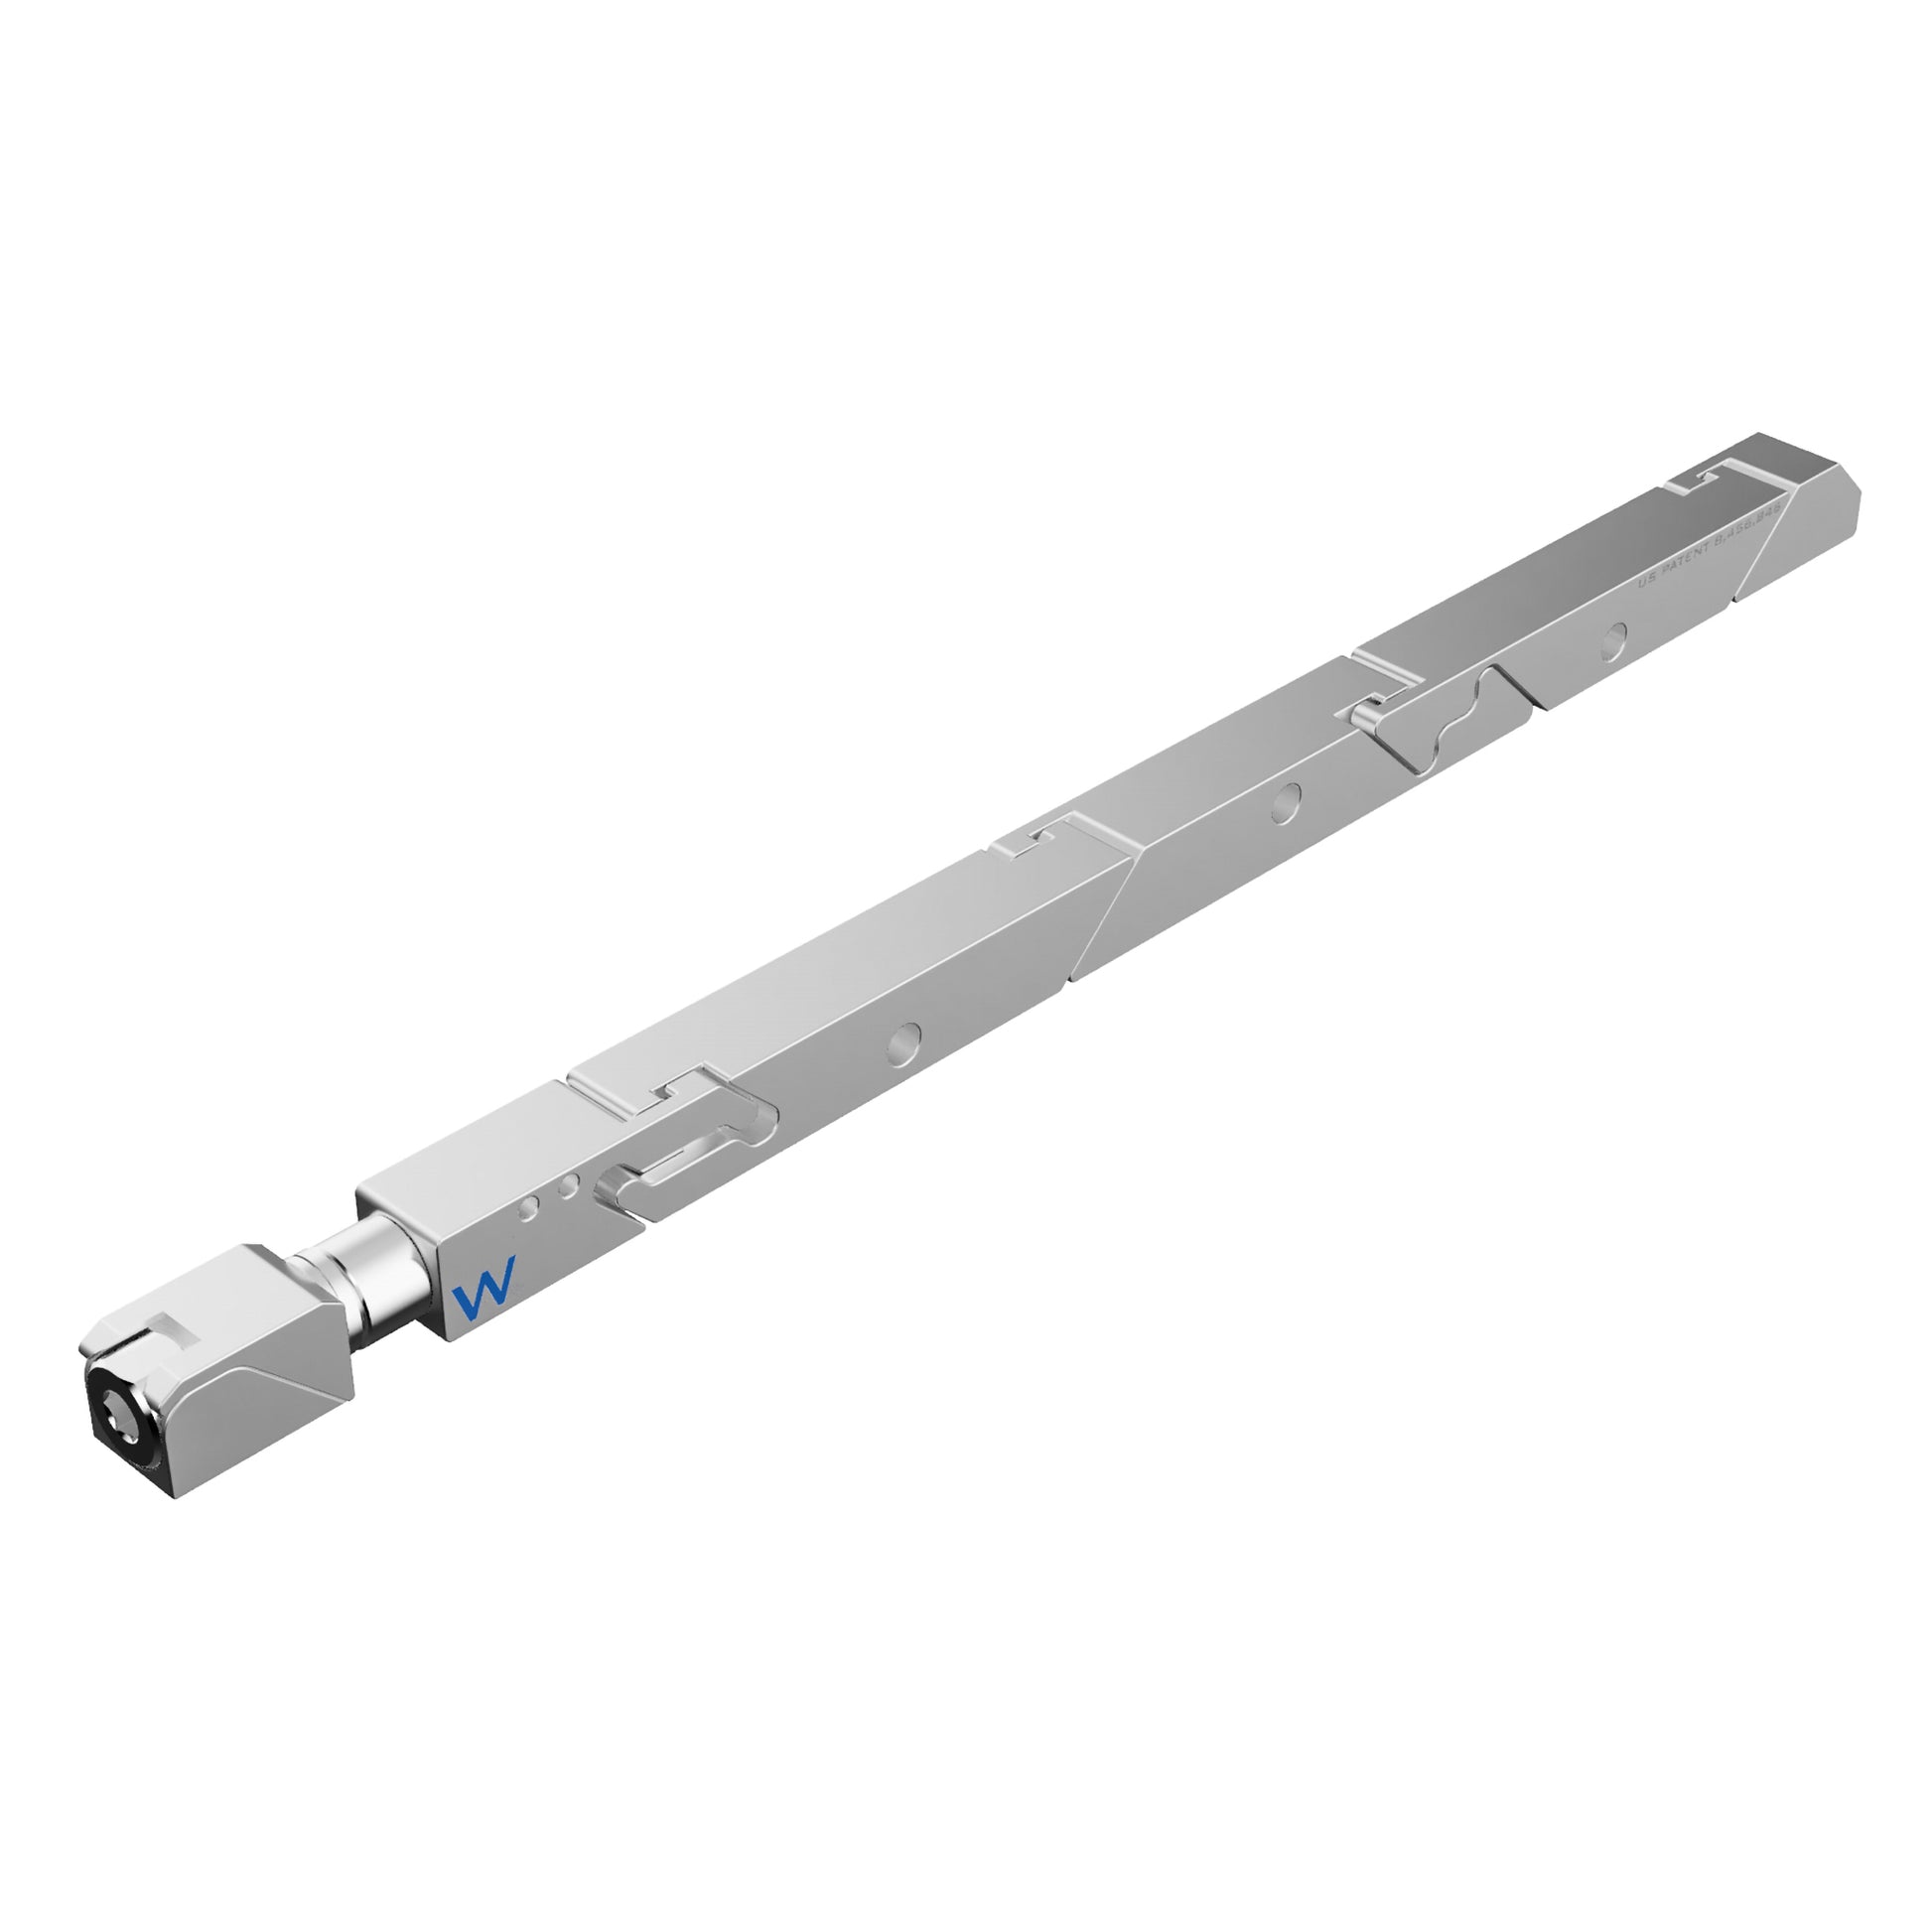 SW7-475-250-250 High Force Wedgelock, segmented long rectulangular hardware component, Clear Chemical Film Finish